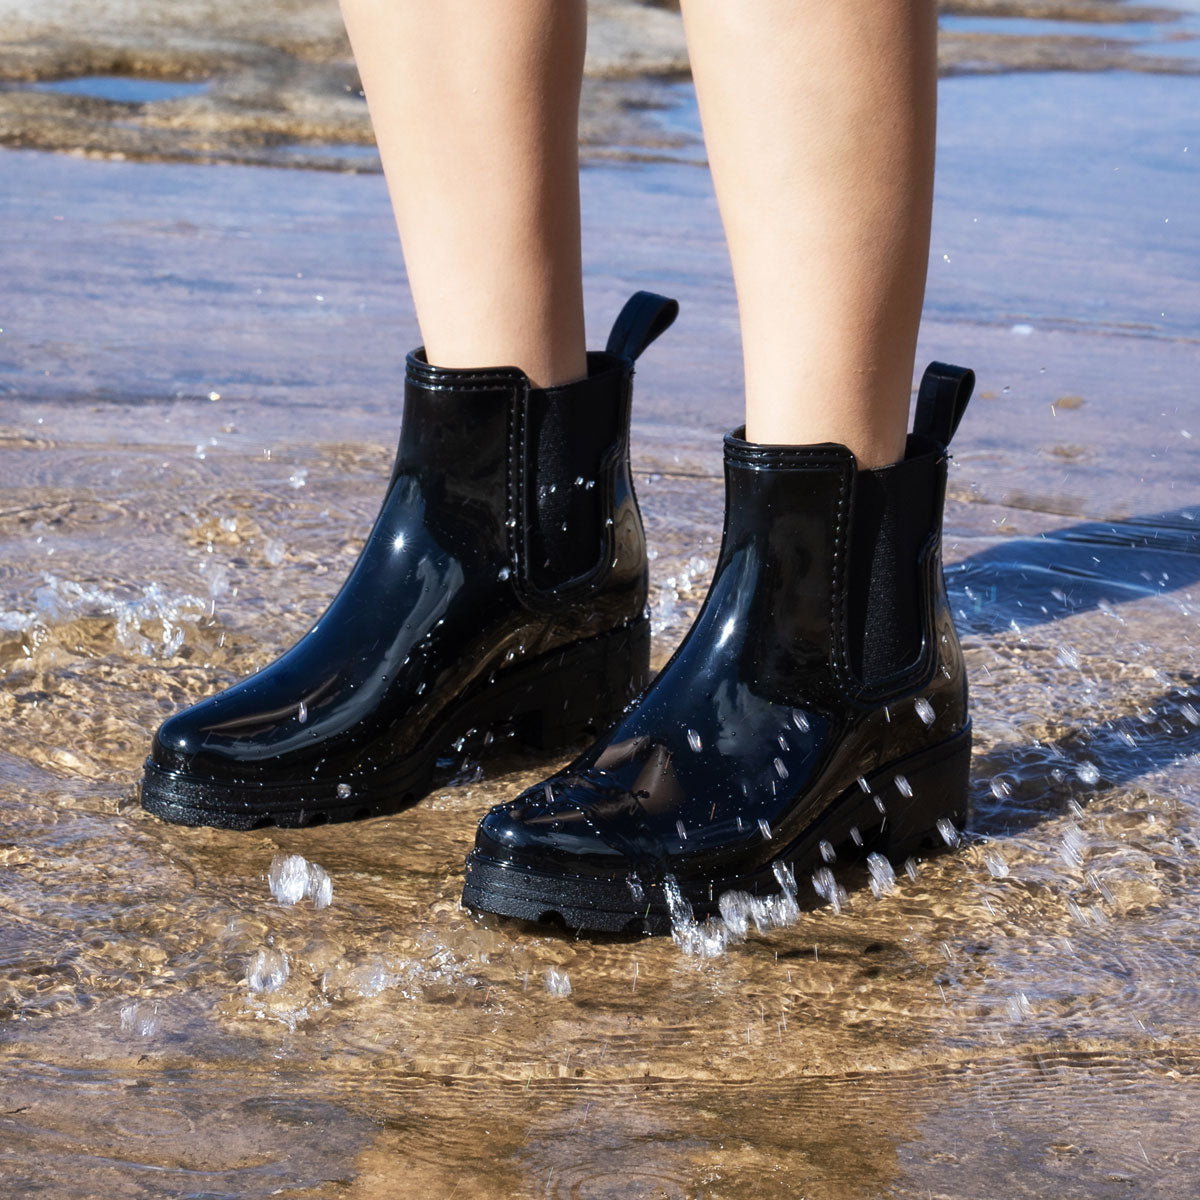 waterproof UGG boots perfect for strolling at the beach